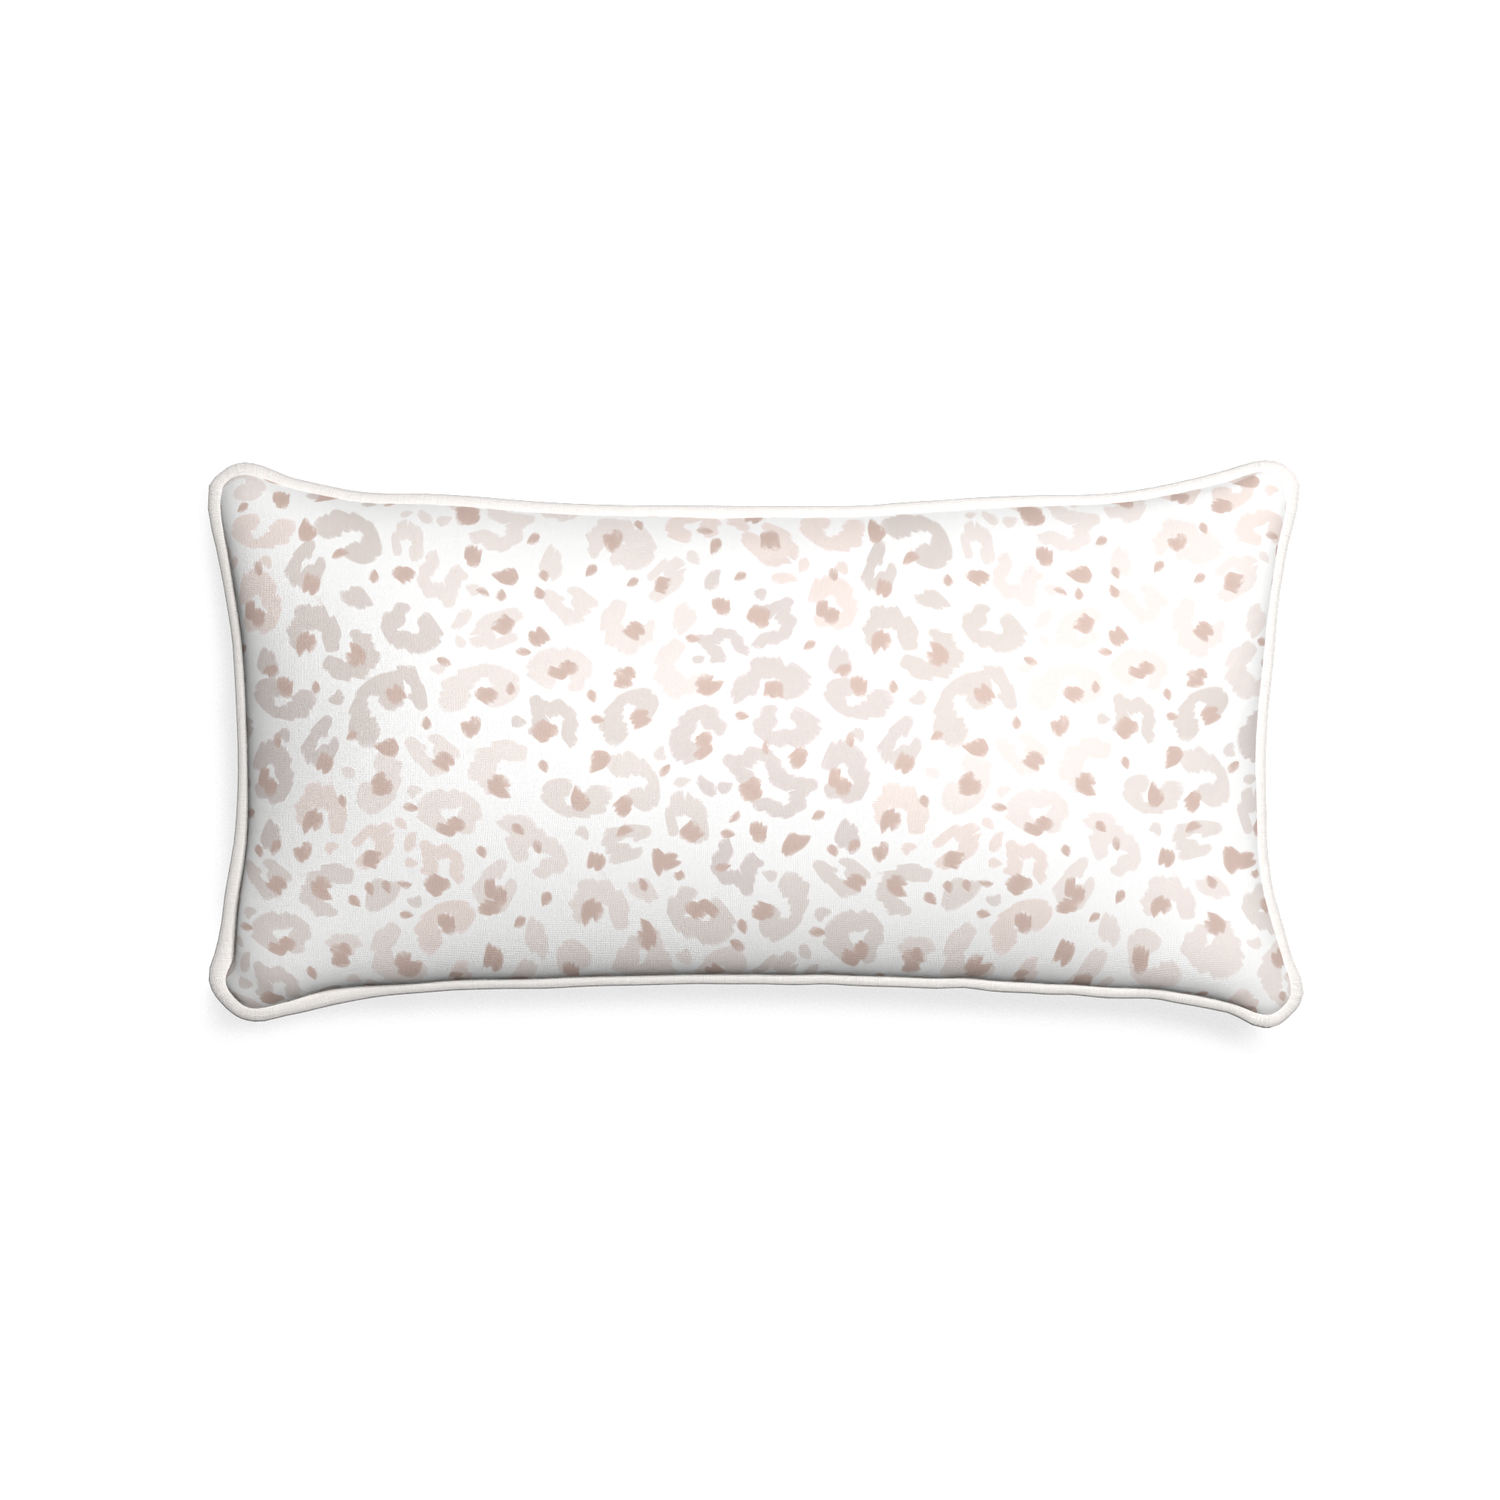 Midi-lumbar rosie custom beige animal printpillow with snow piping on white background